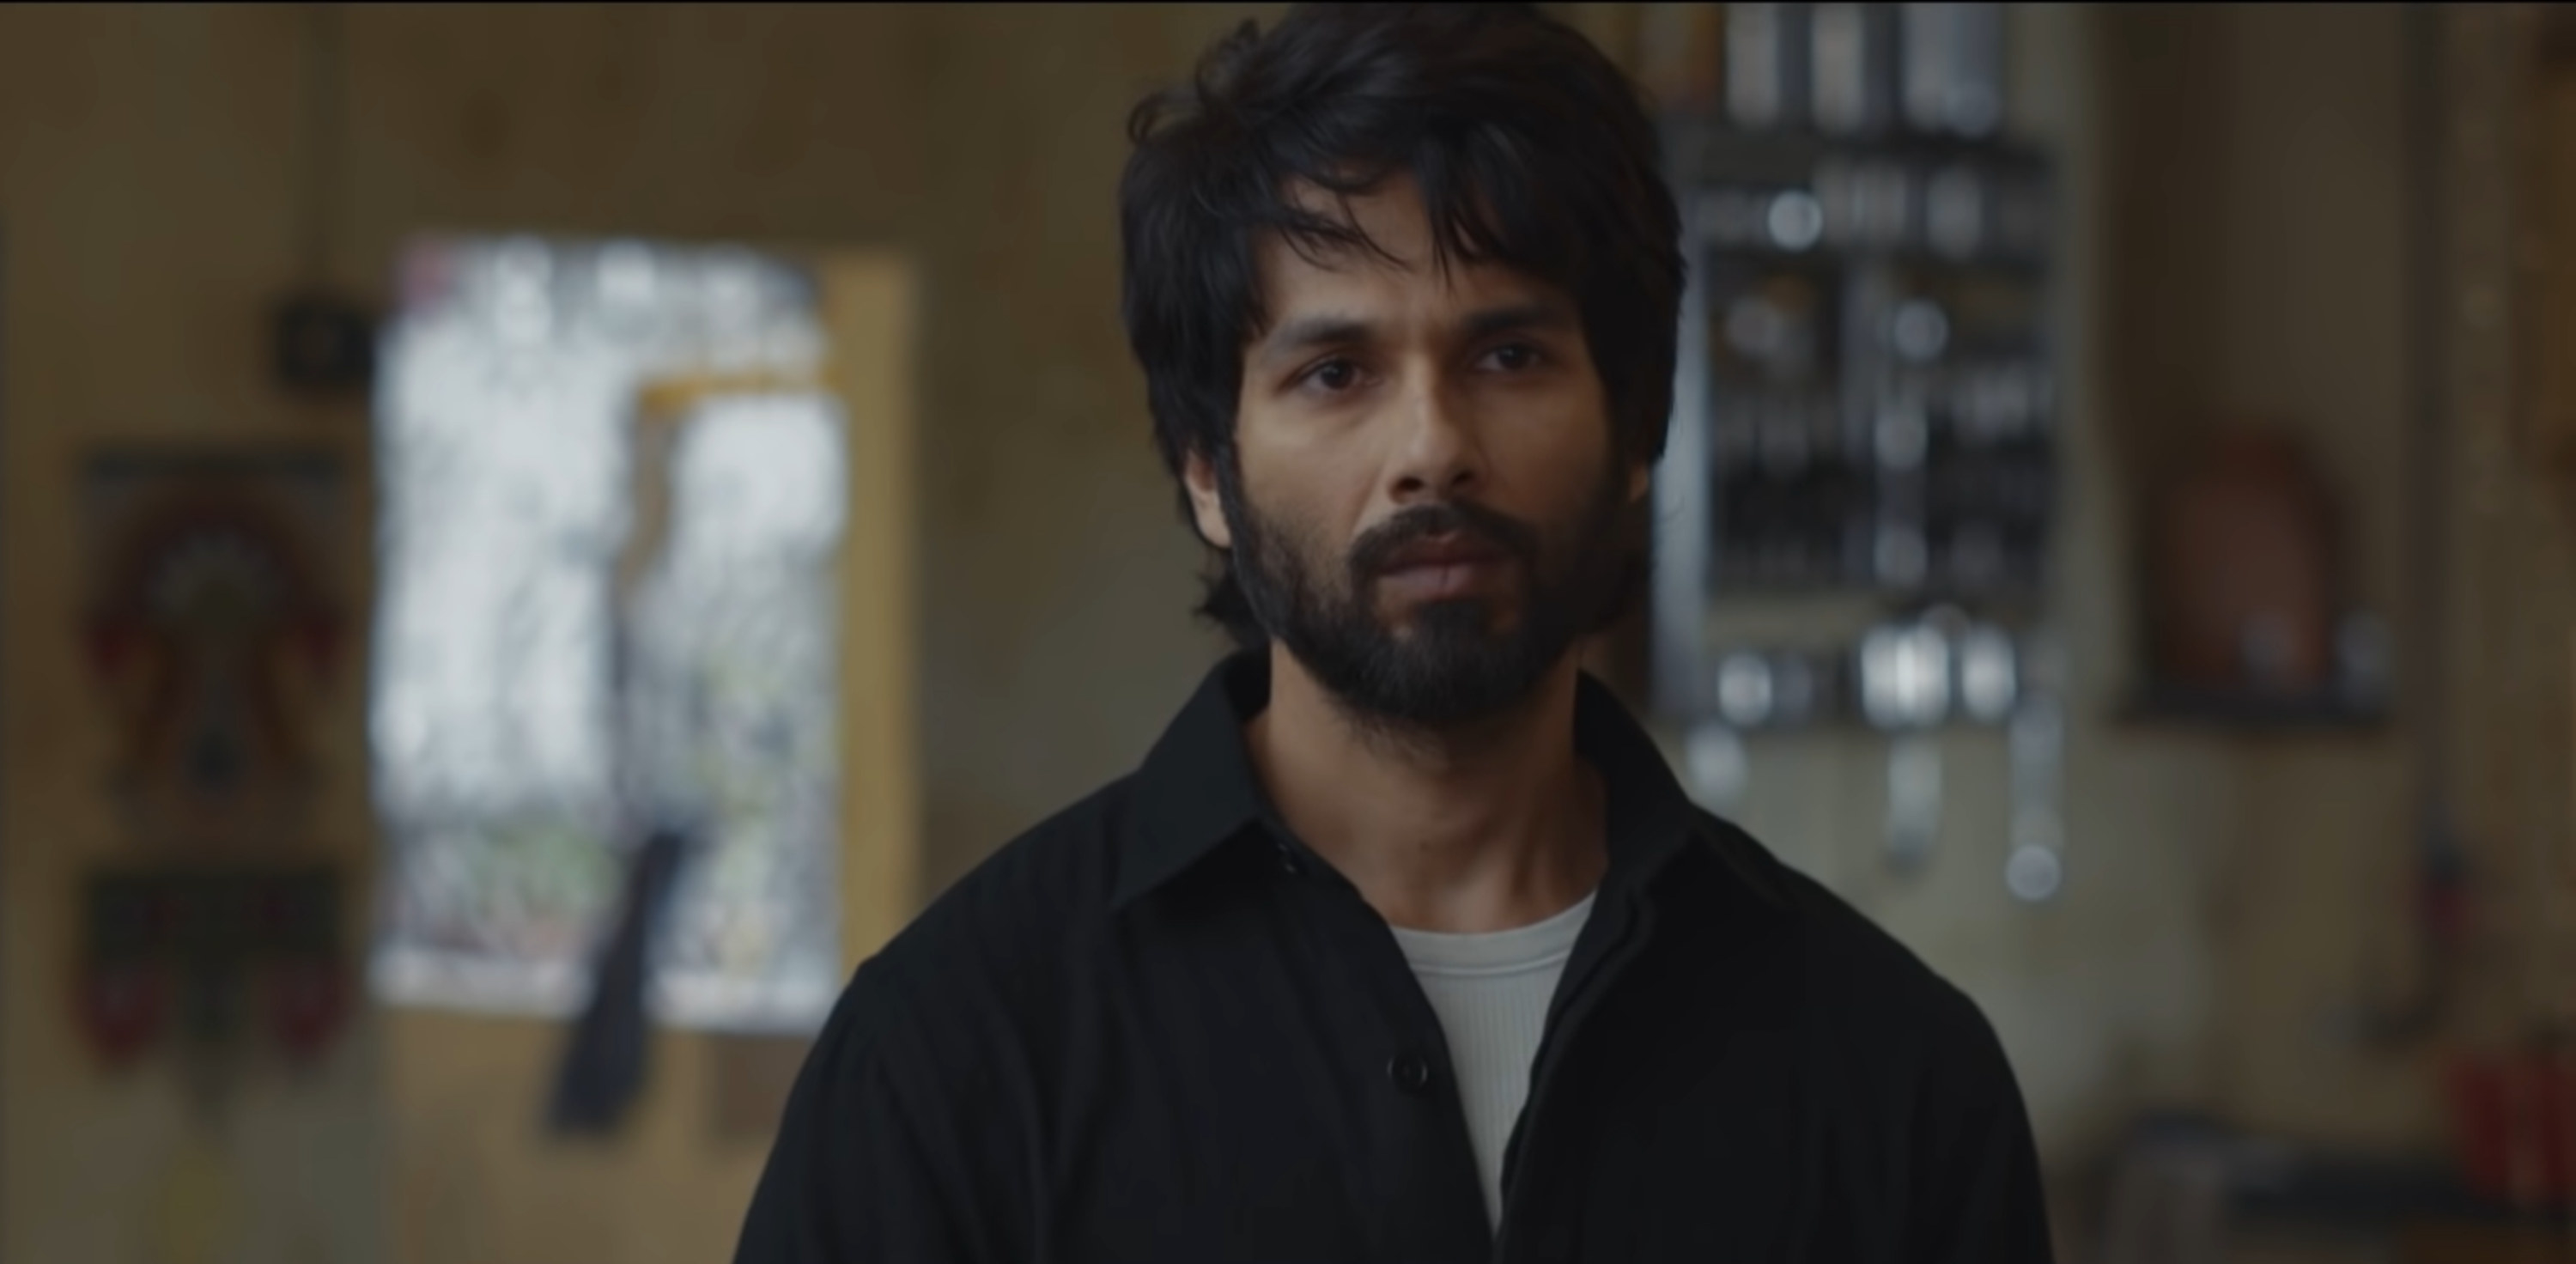 Shahid Kapoor with a sad expression on his face